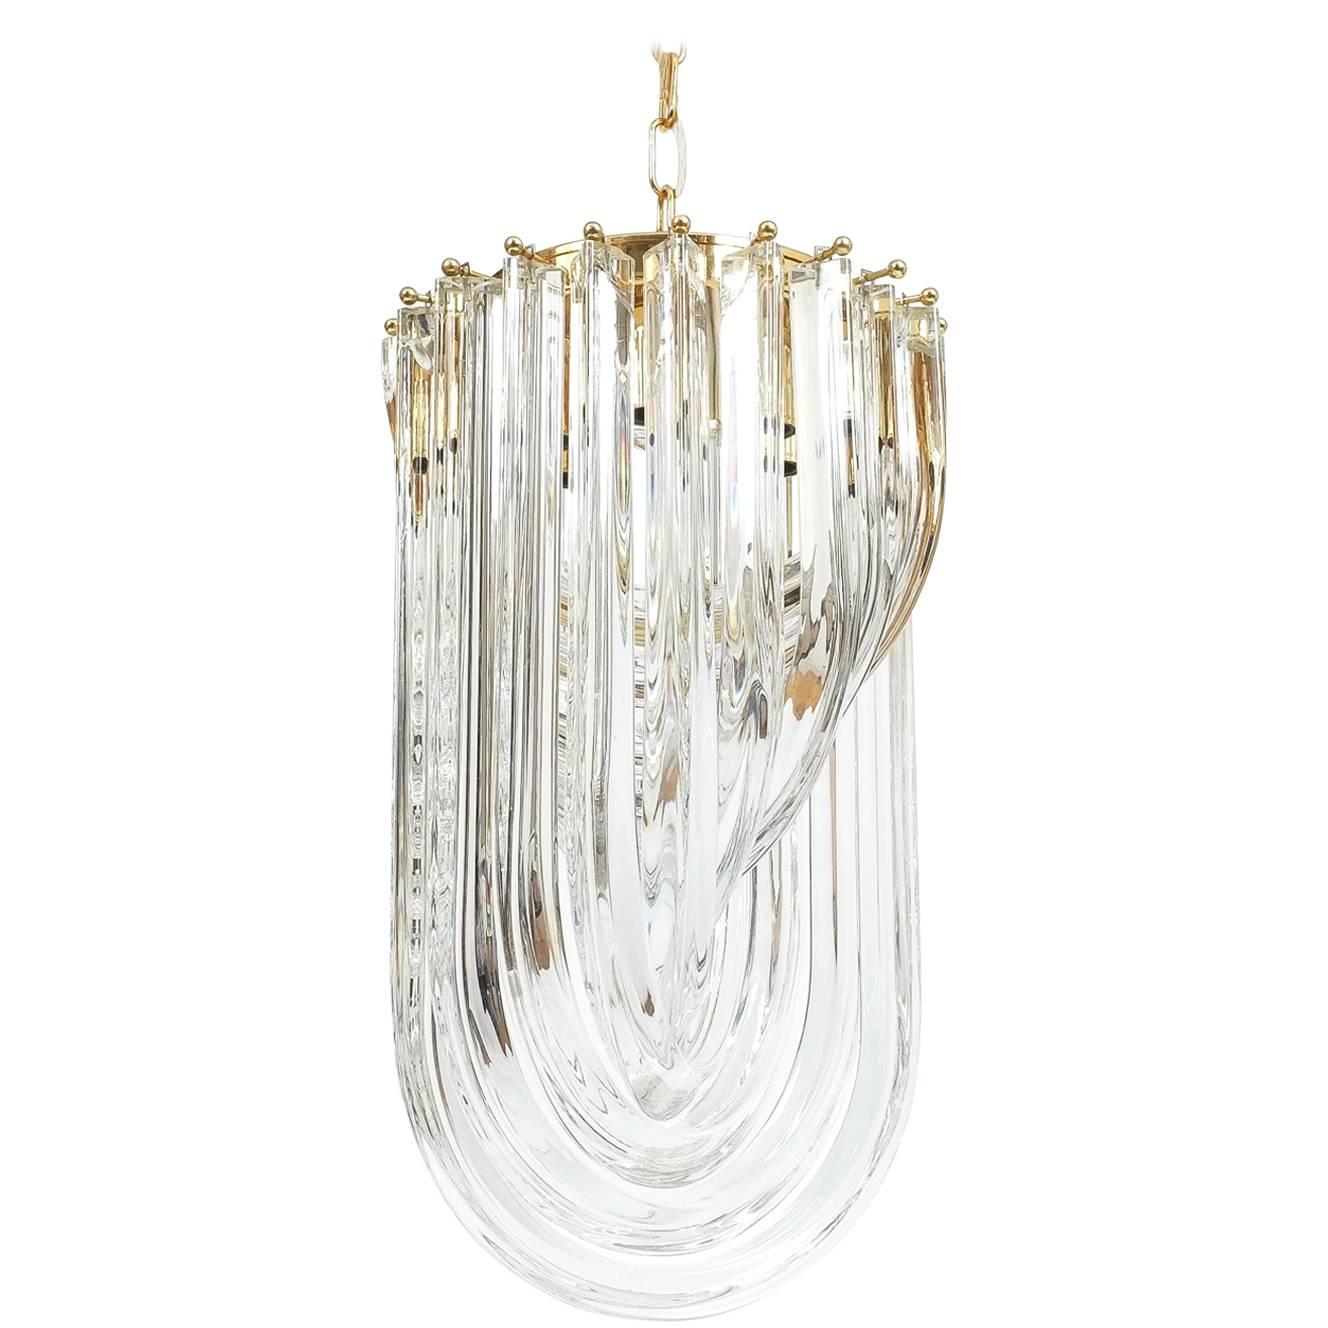 One of Three Venini Curved Crystal Glass Gilt Brass Chandelier For Sale